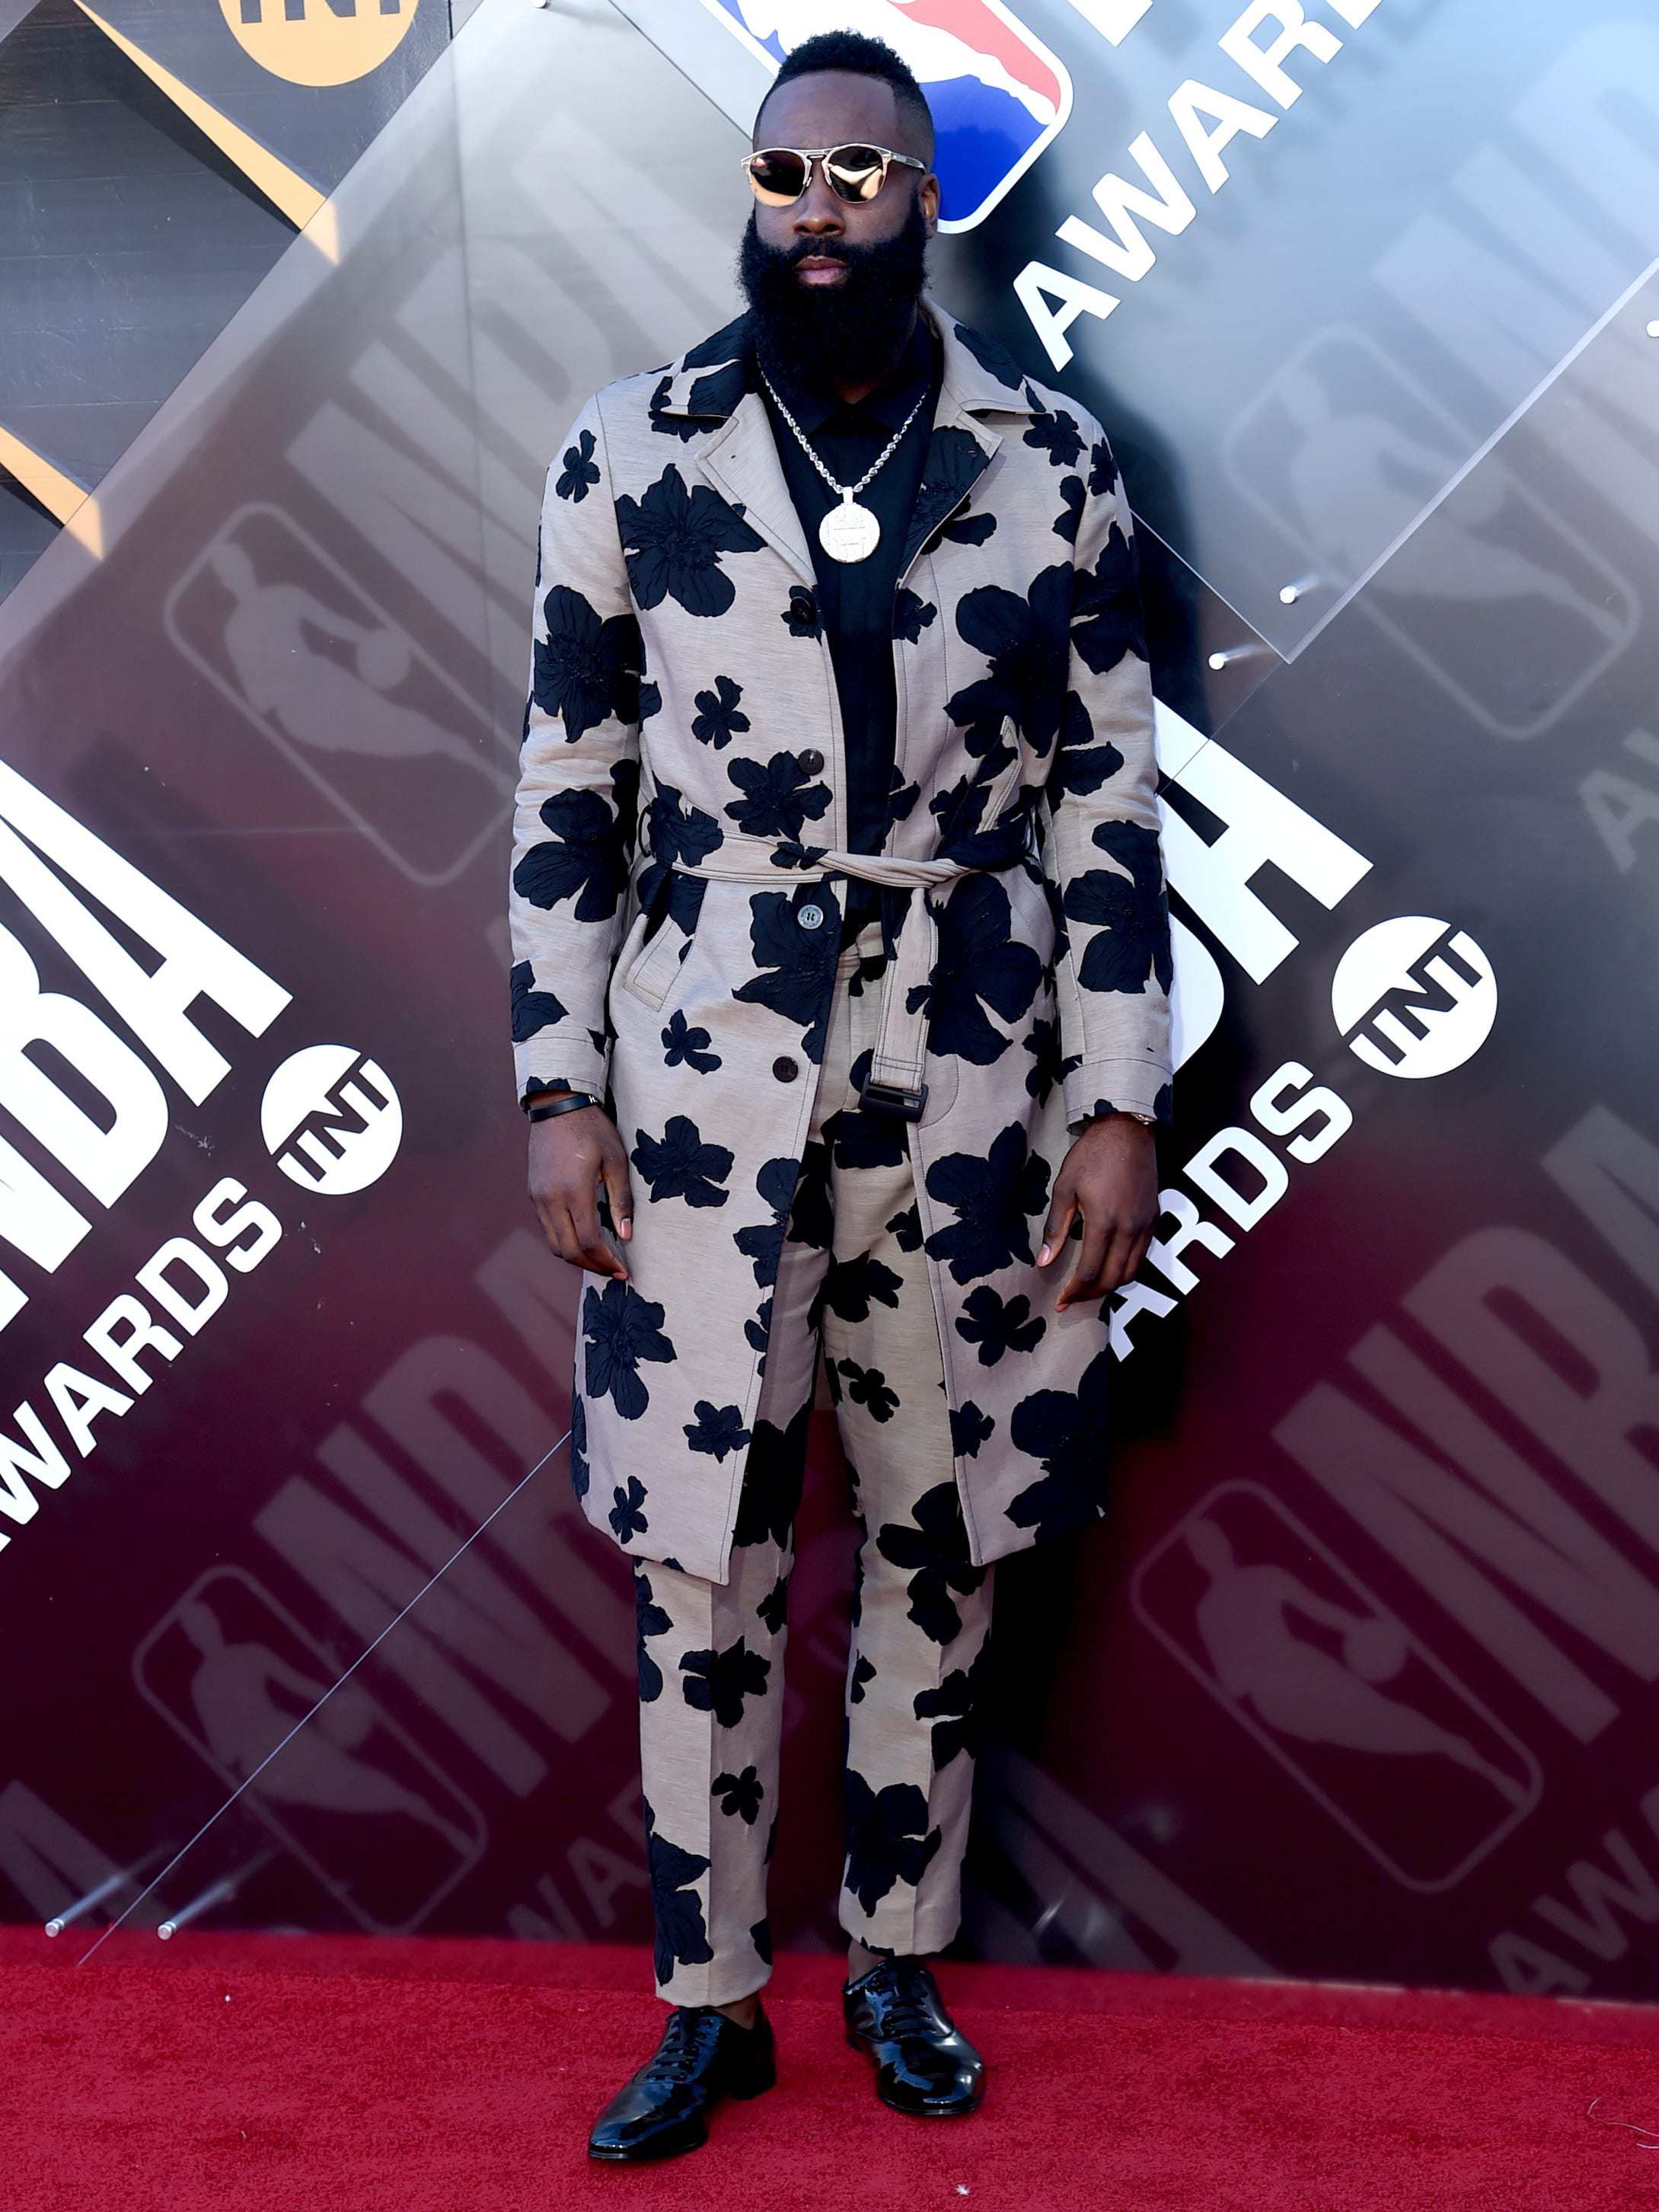 How would you describe James Harden's outfit?